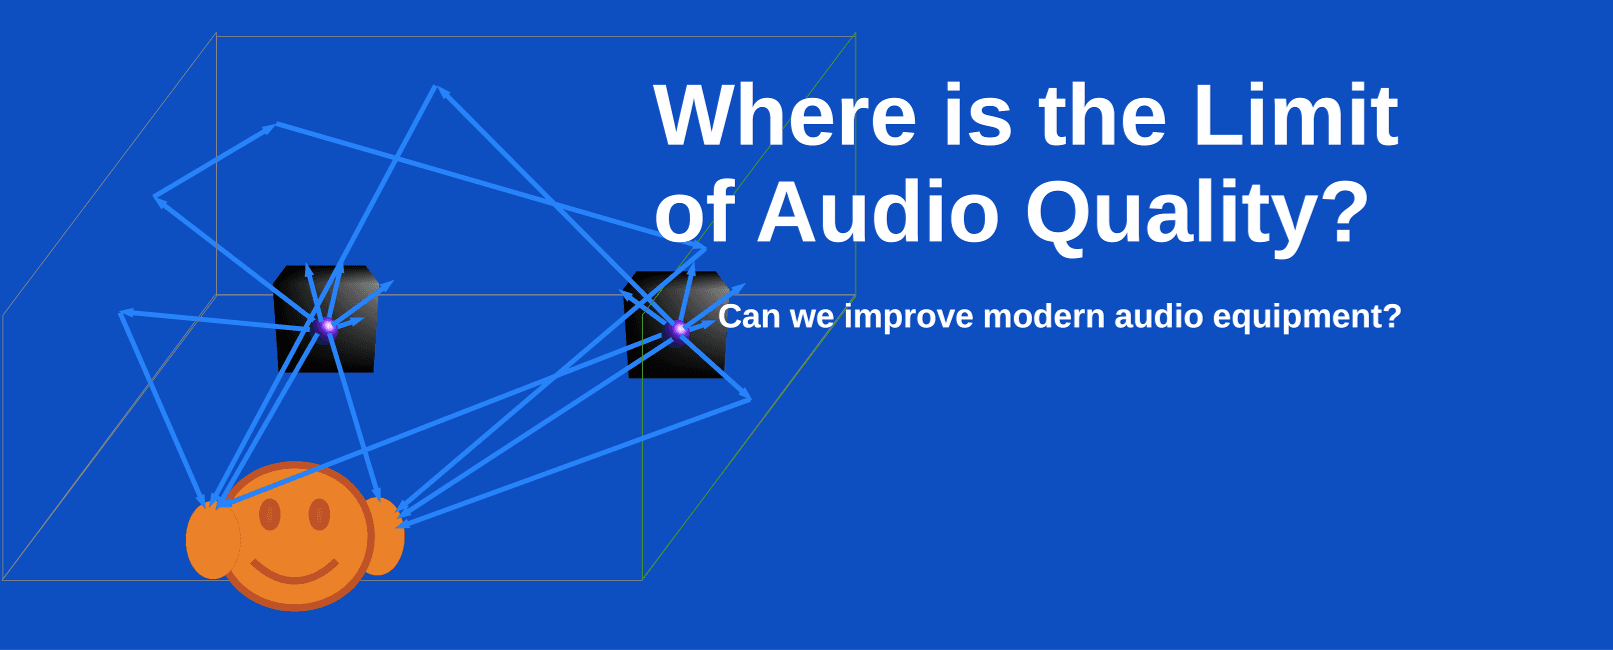 Where is the Limit of Audio Quality